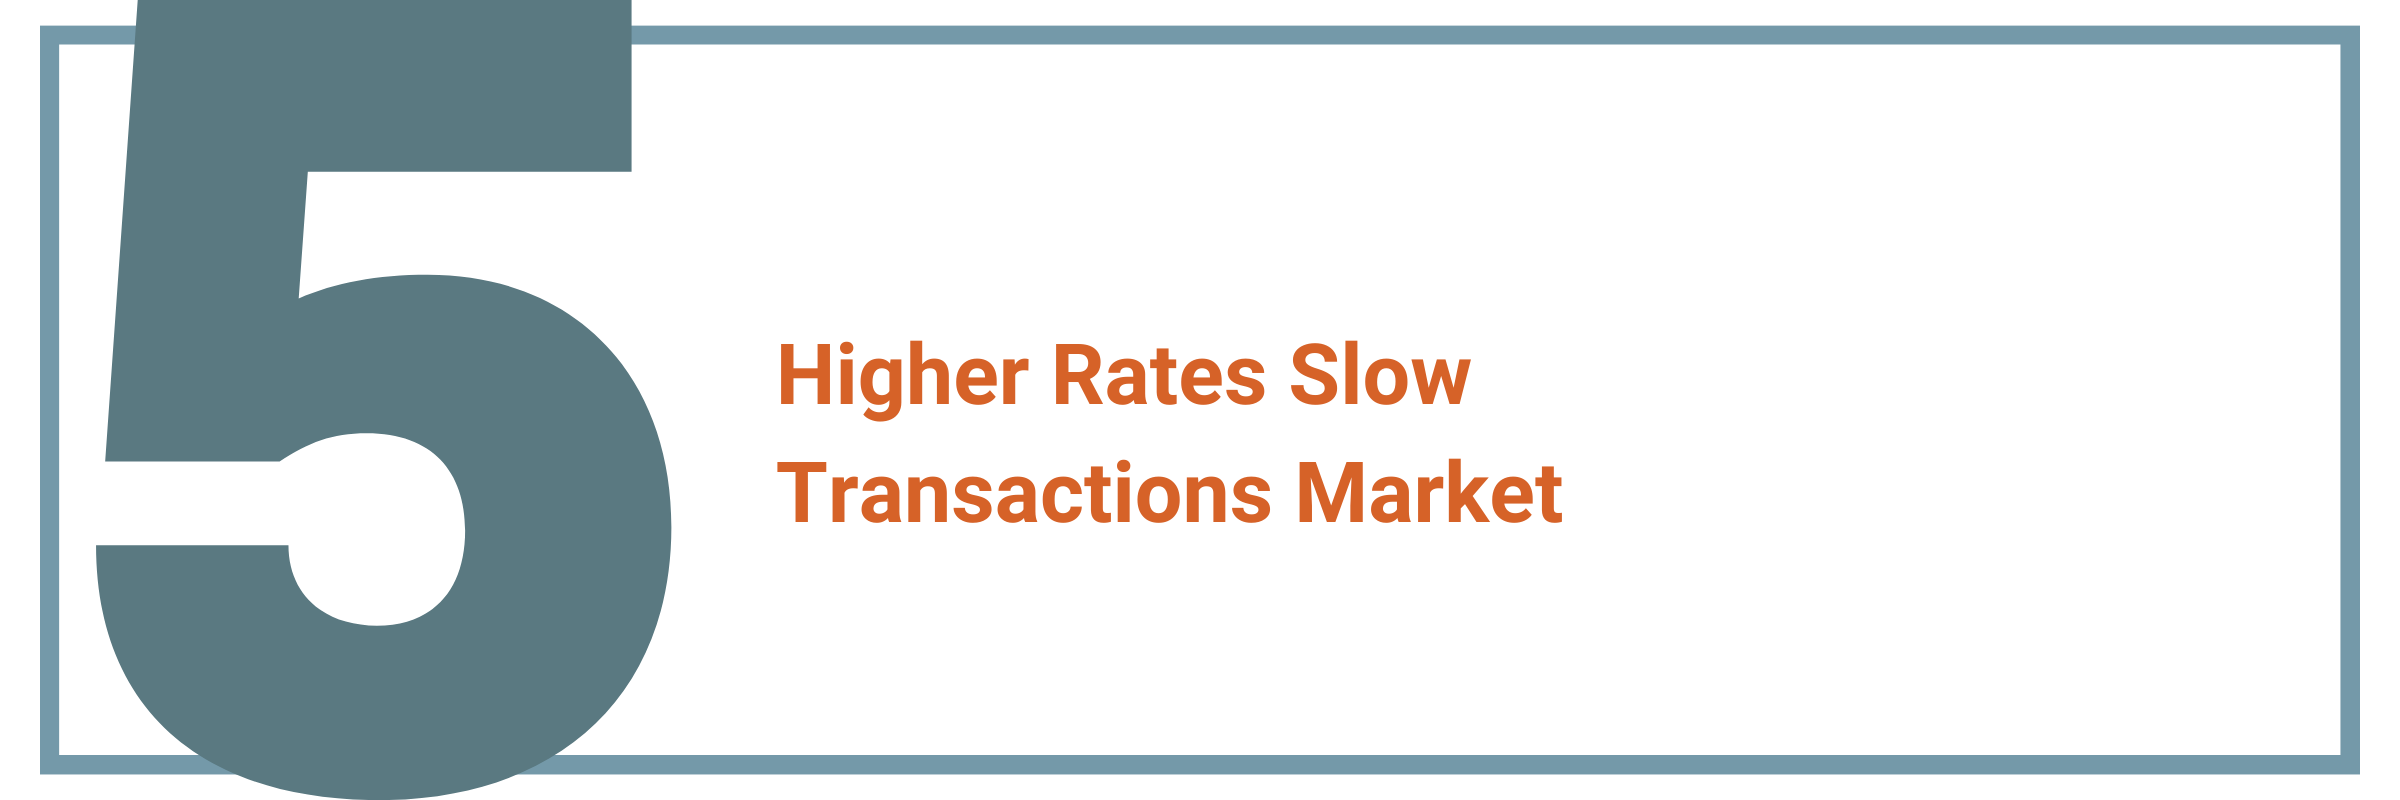 Higher Rates Slow Transactions Market